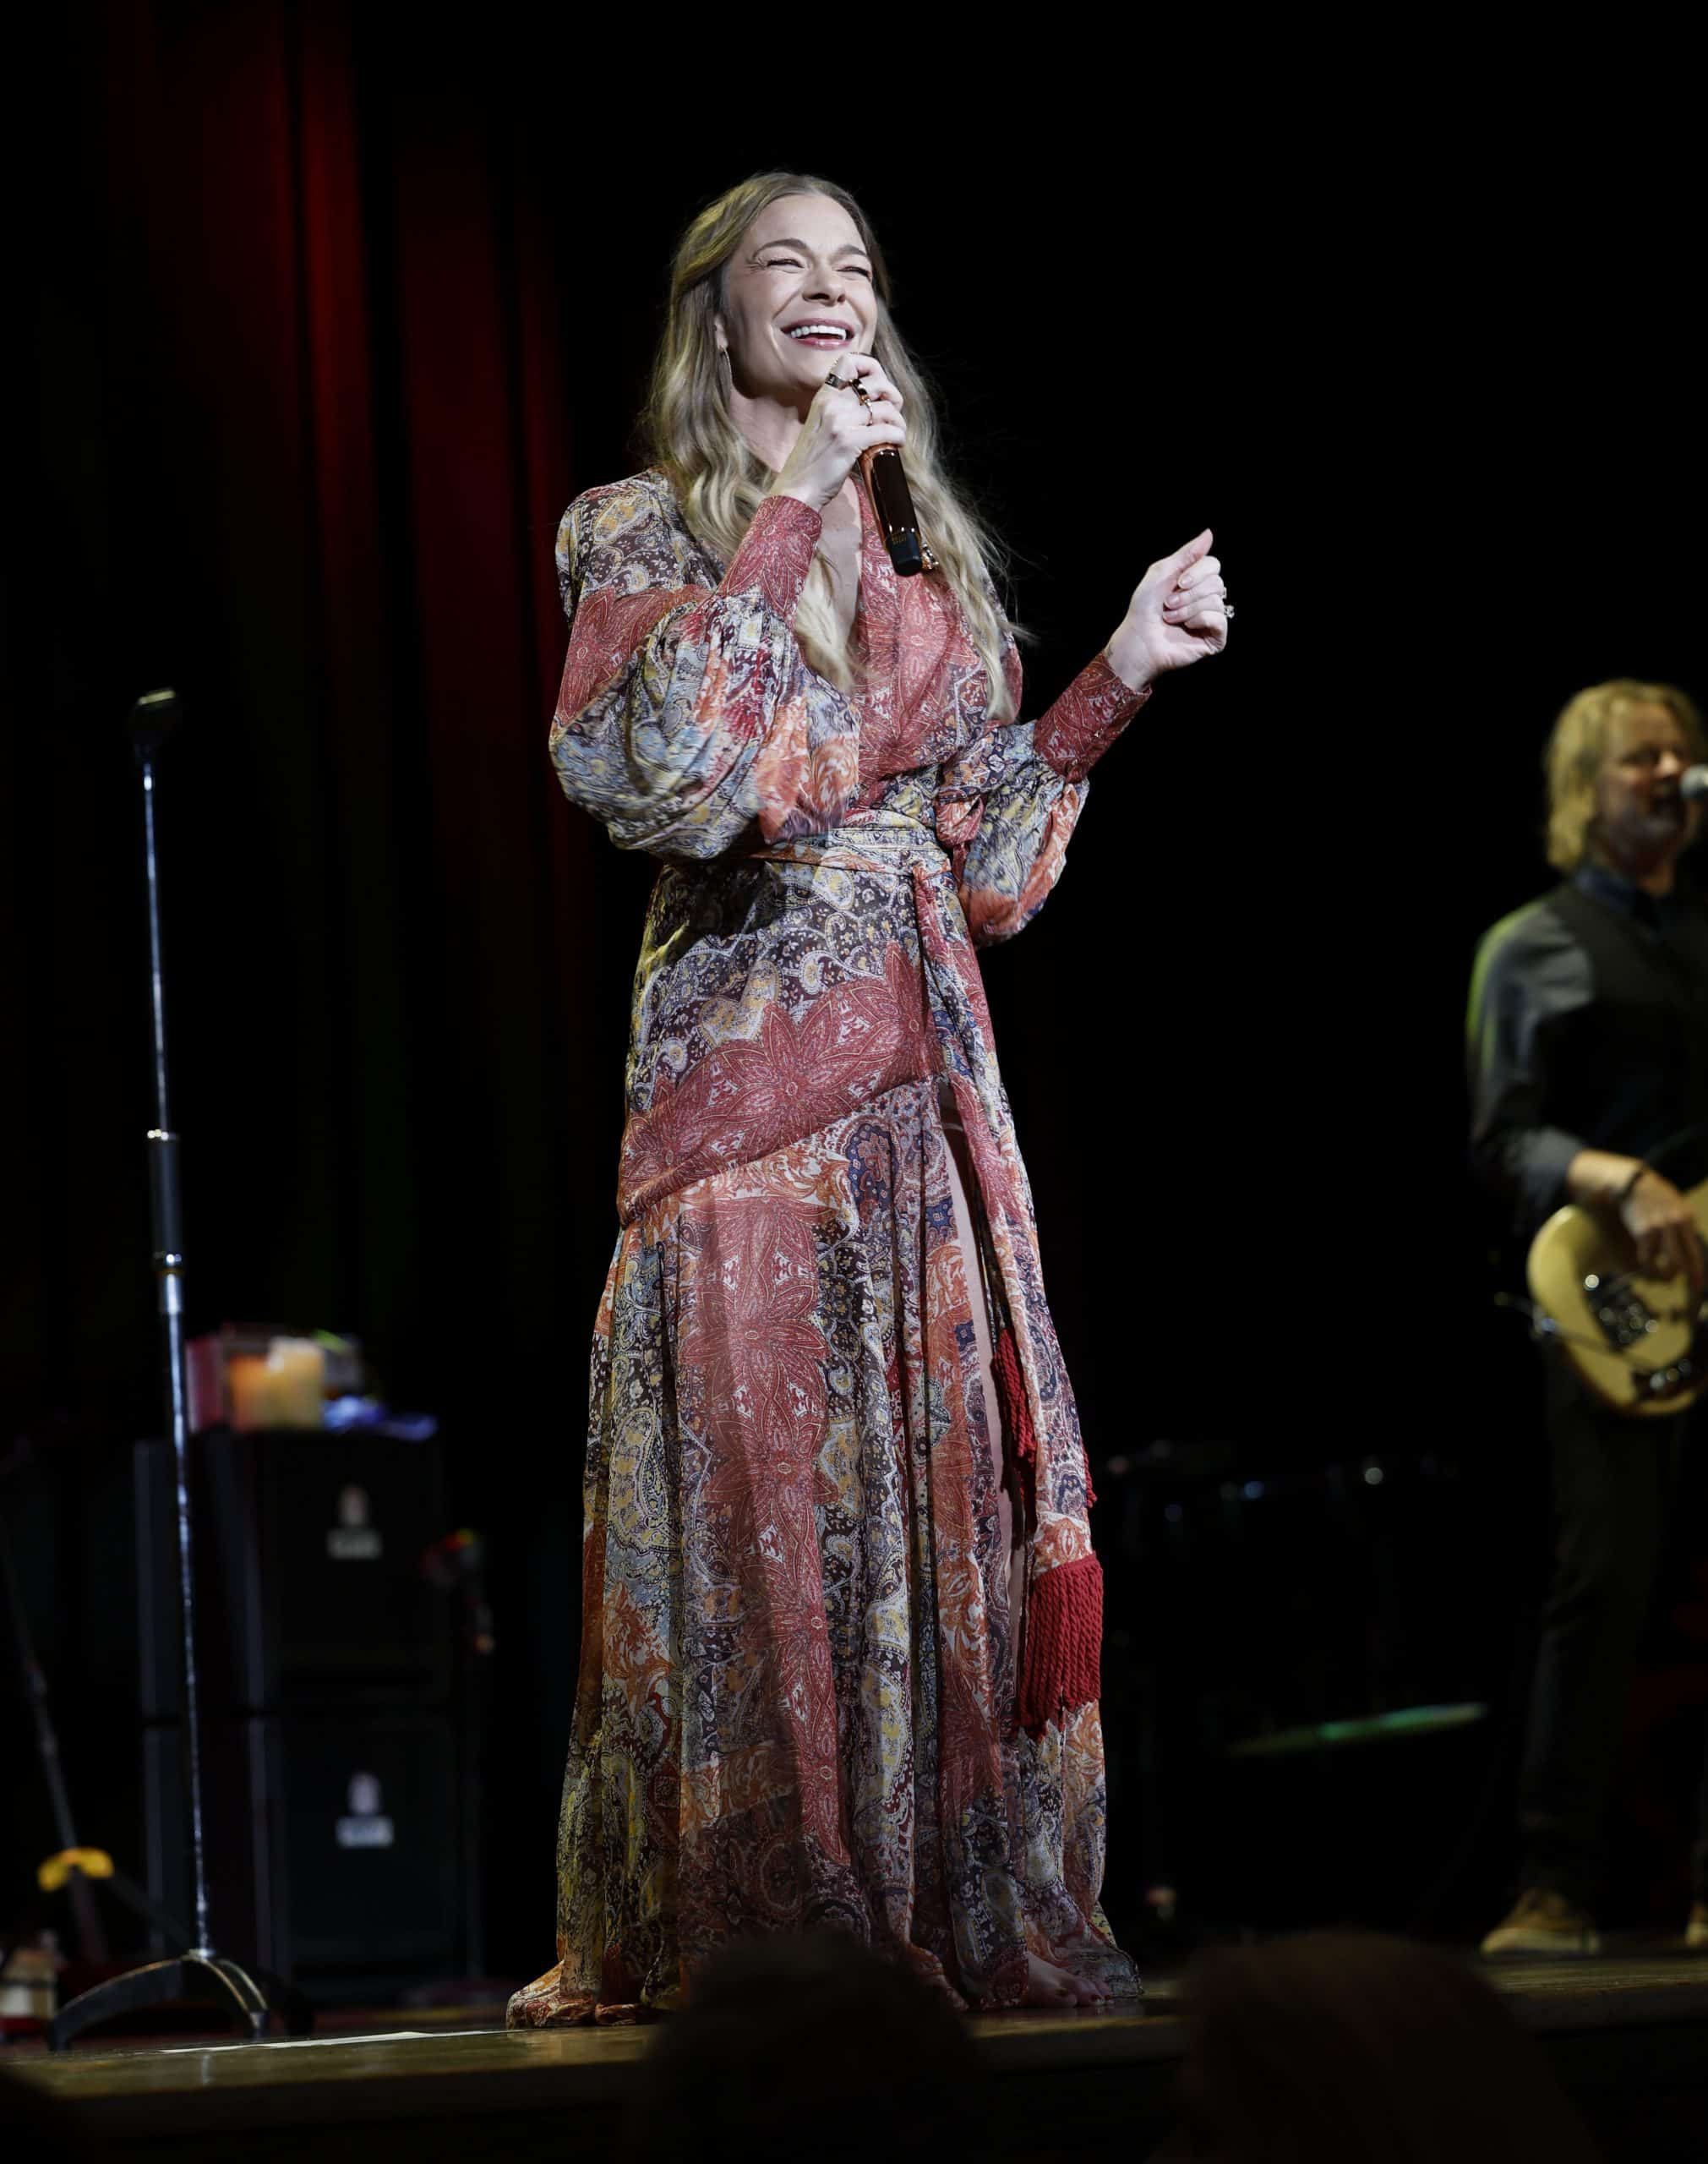 NASHVILLE, TENNESSEE - APRIL 08: LeAnn Rimes performs at the Ryman Auditorium on April 08, 2023 in Nashville, Tennessee. (Photo by Jason Kempin/Getty Images)